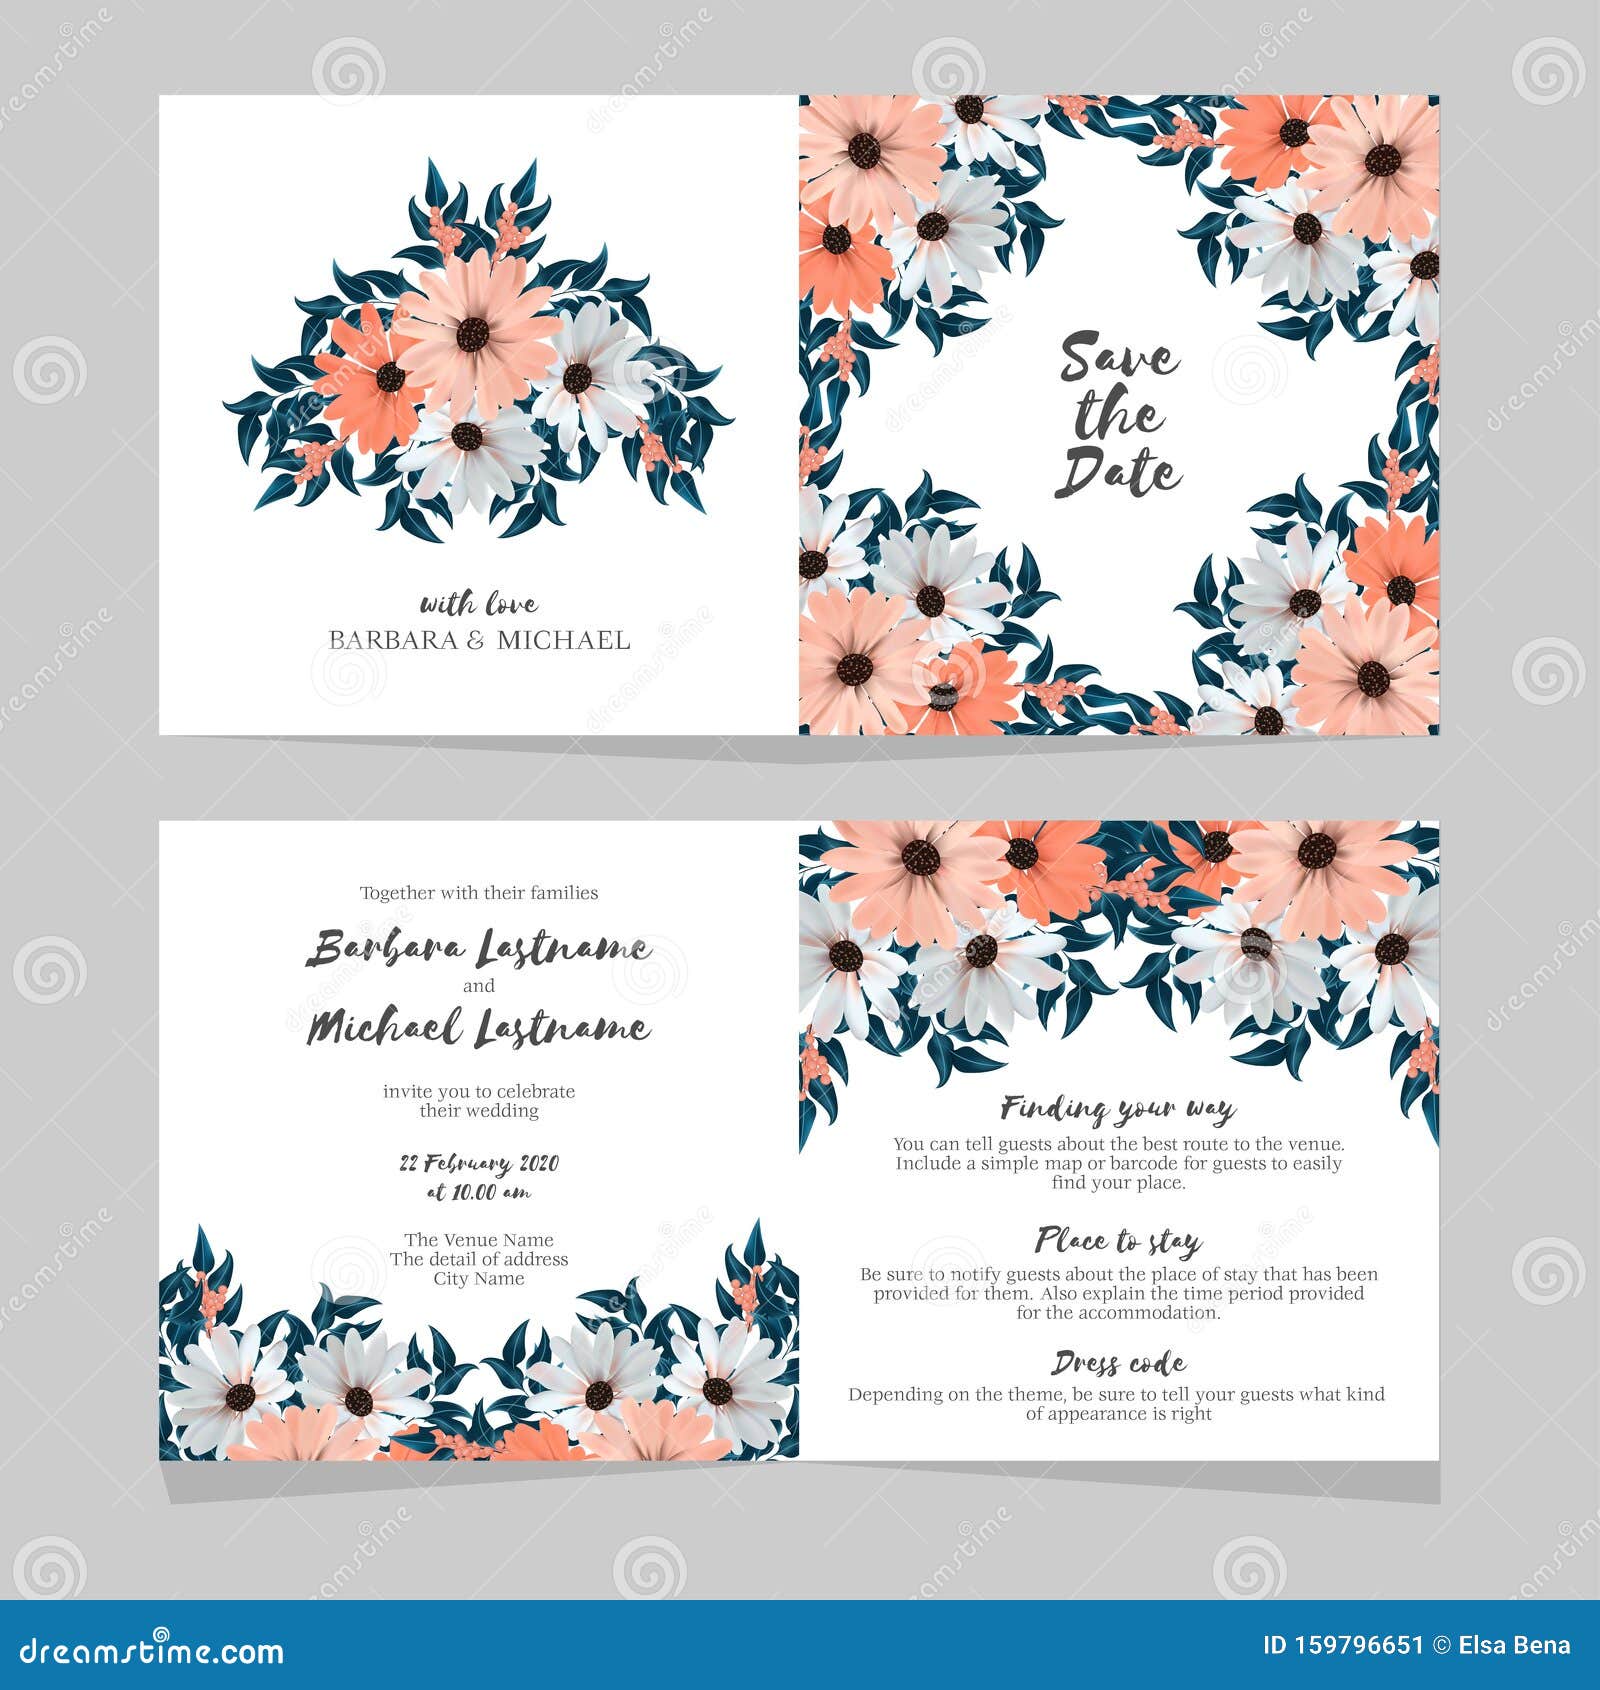 Beige Daisy Floral Wedding Invitation Card Template Stock In Michaels Place Card Template